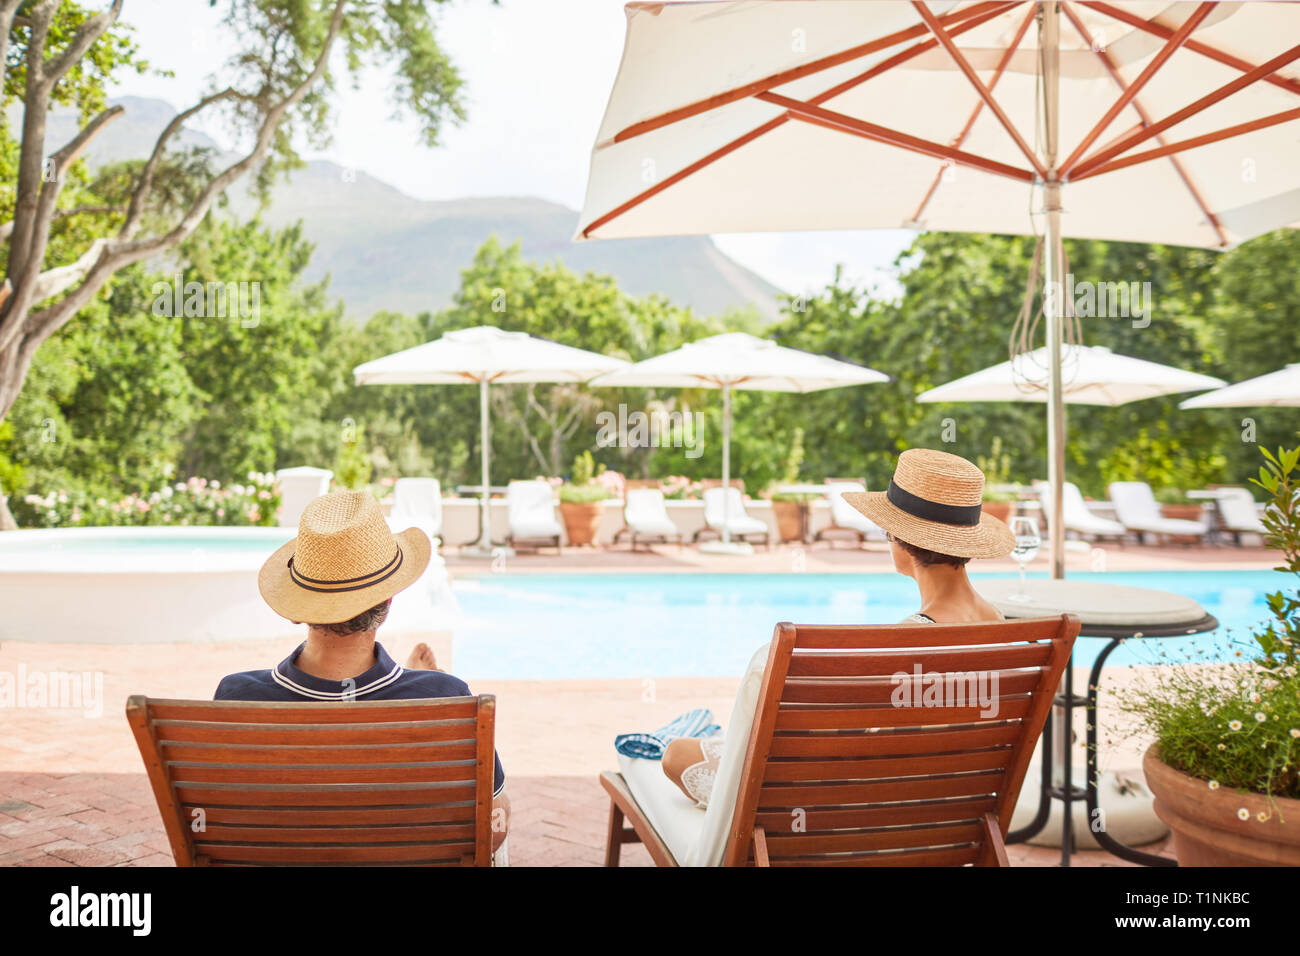 Couple relaxing on lounge chairs at sunny resort poolside Stock Photo